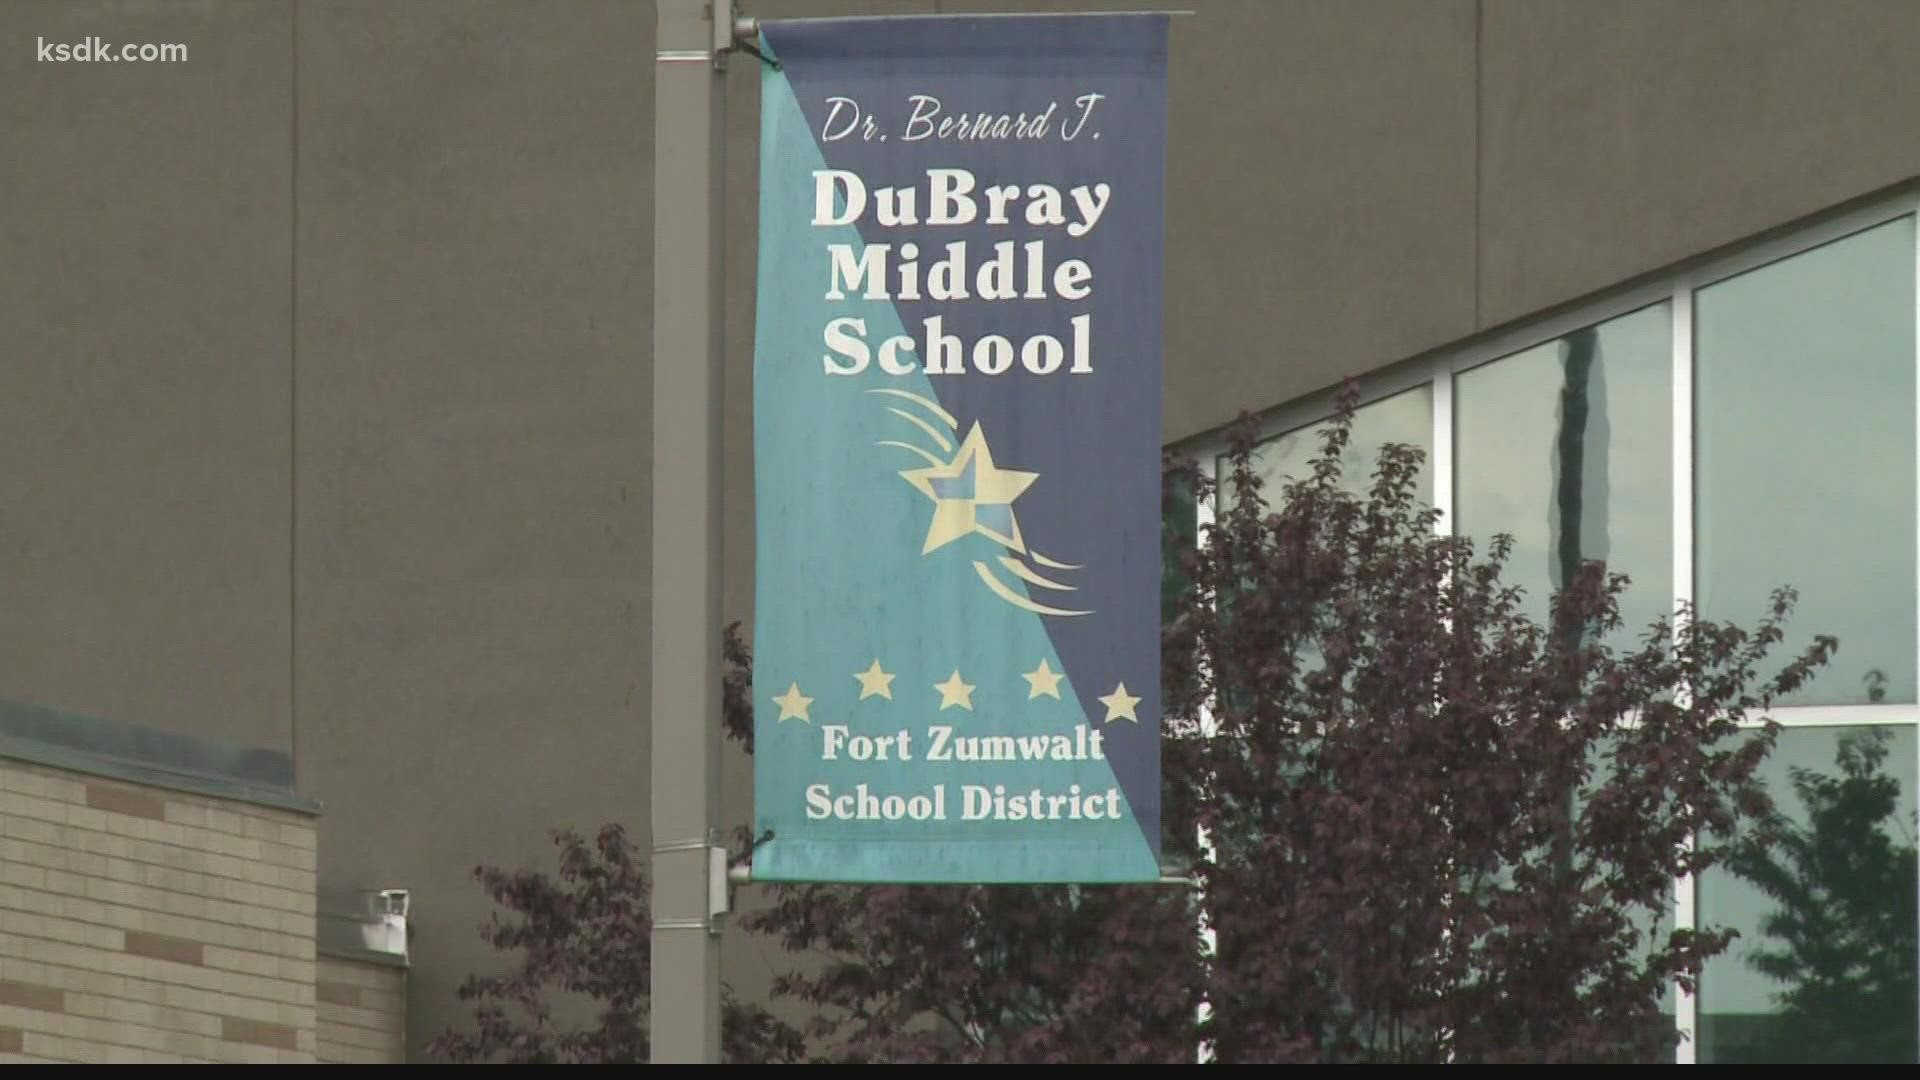 A middle school student in St. Peters was taken into police custody for bringing a gun to school Tuesday. The incident involved a student at DuBray Middle School.